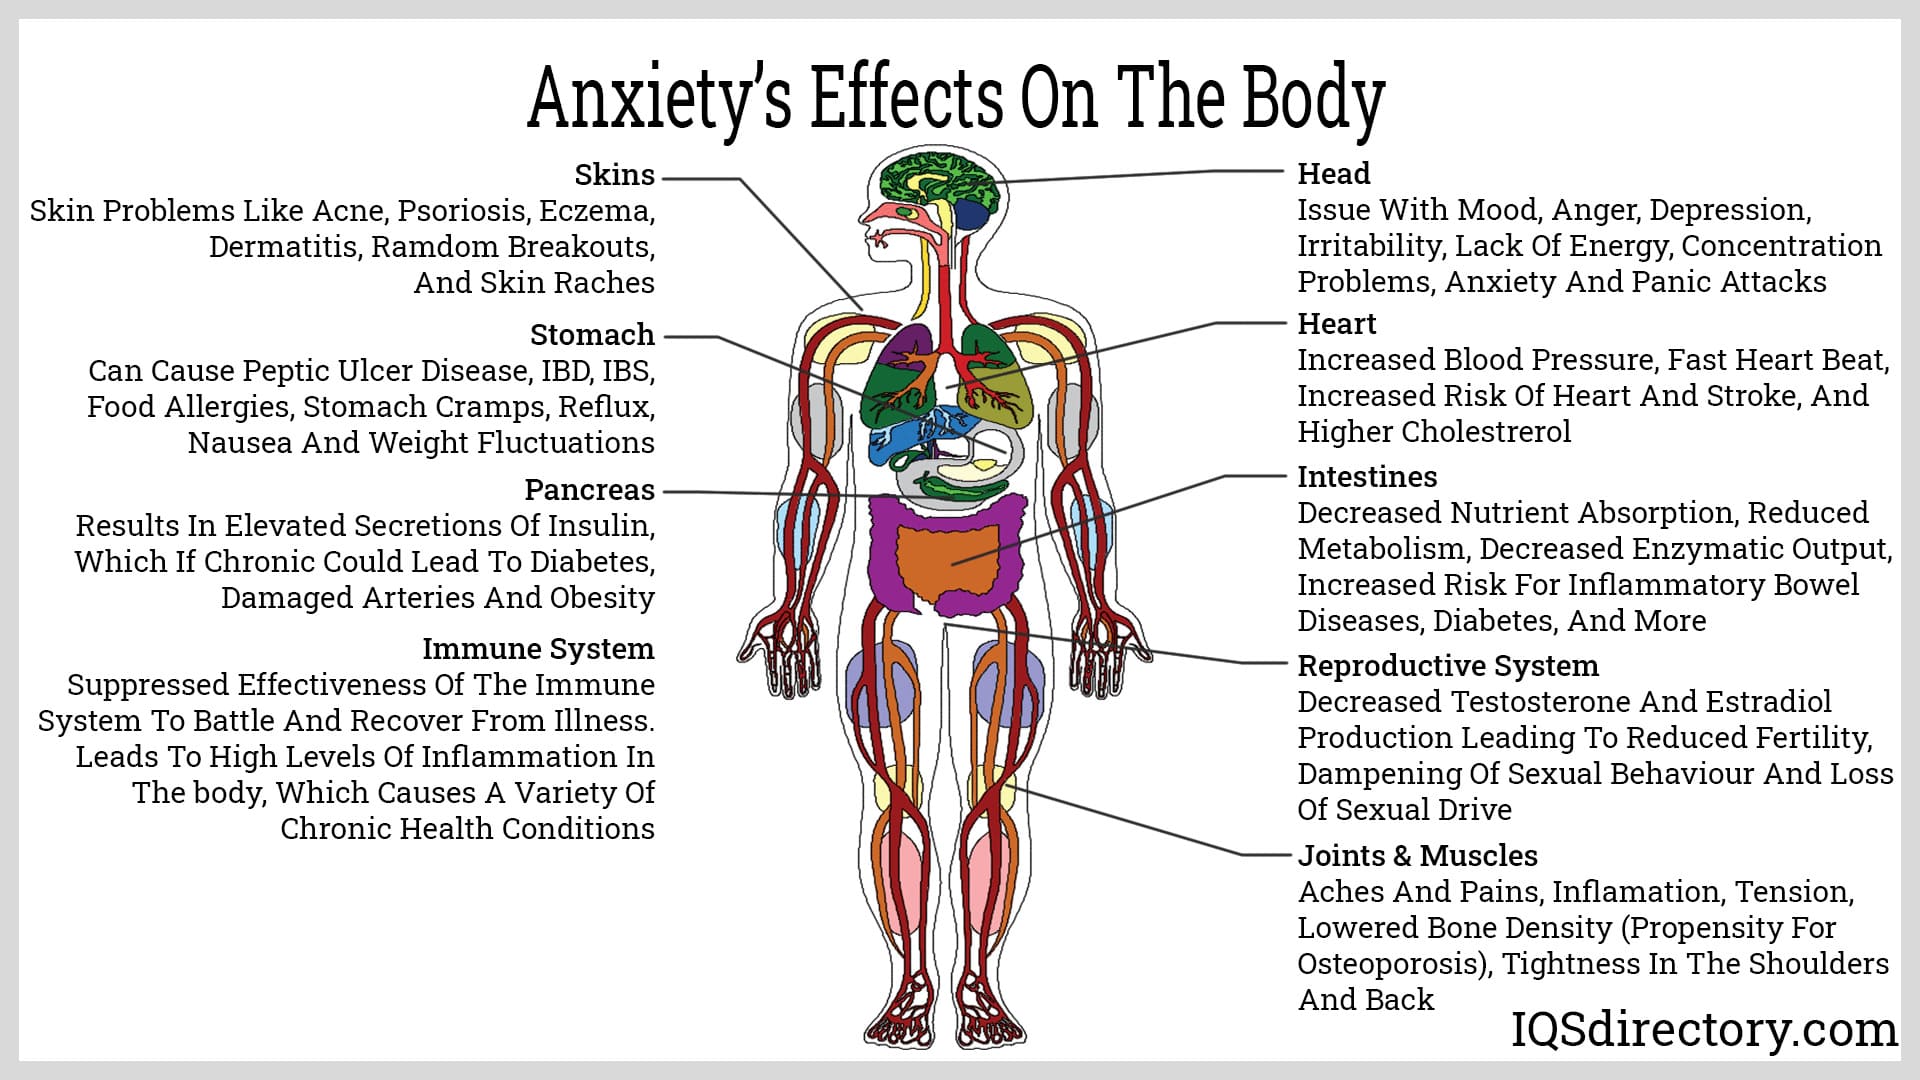 Anxiety‘s Effects on the Body